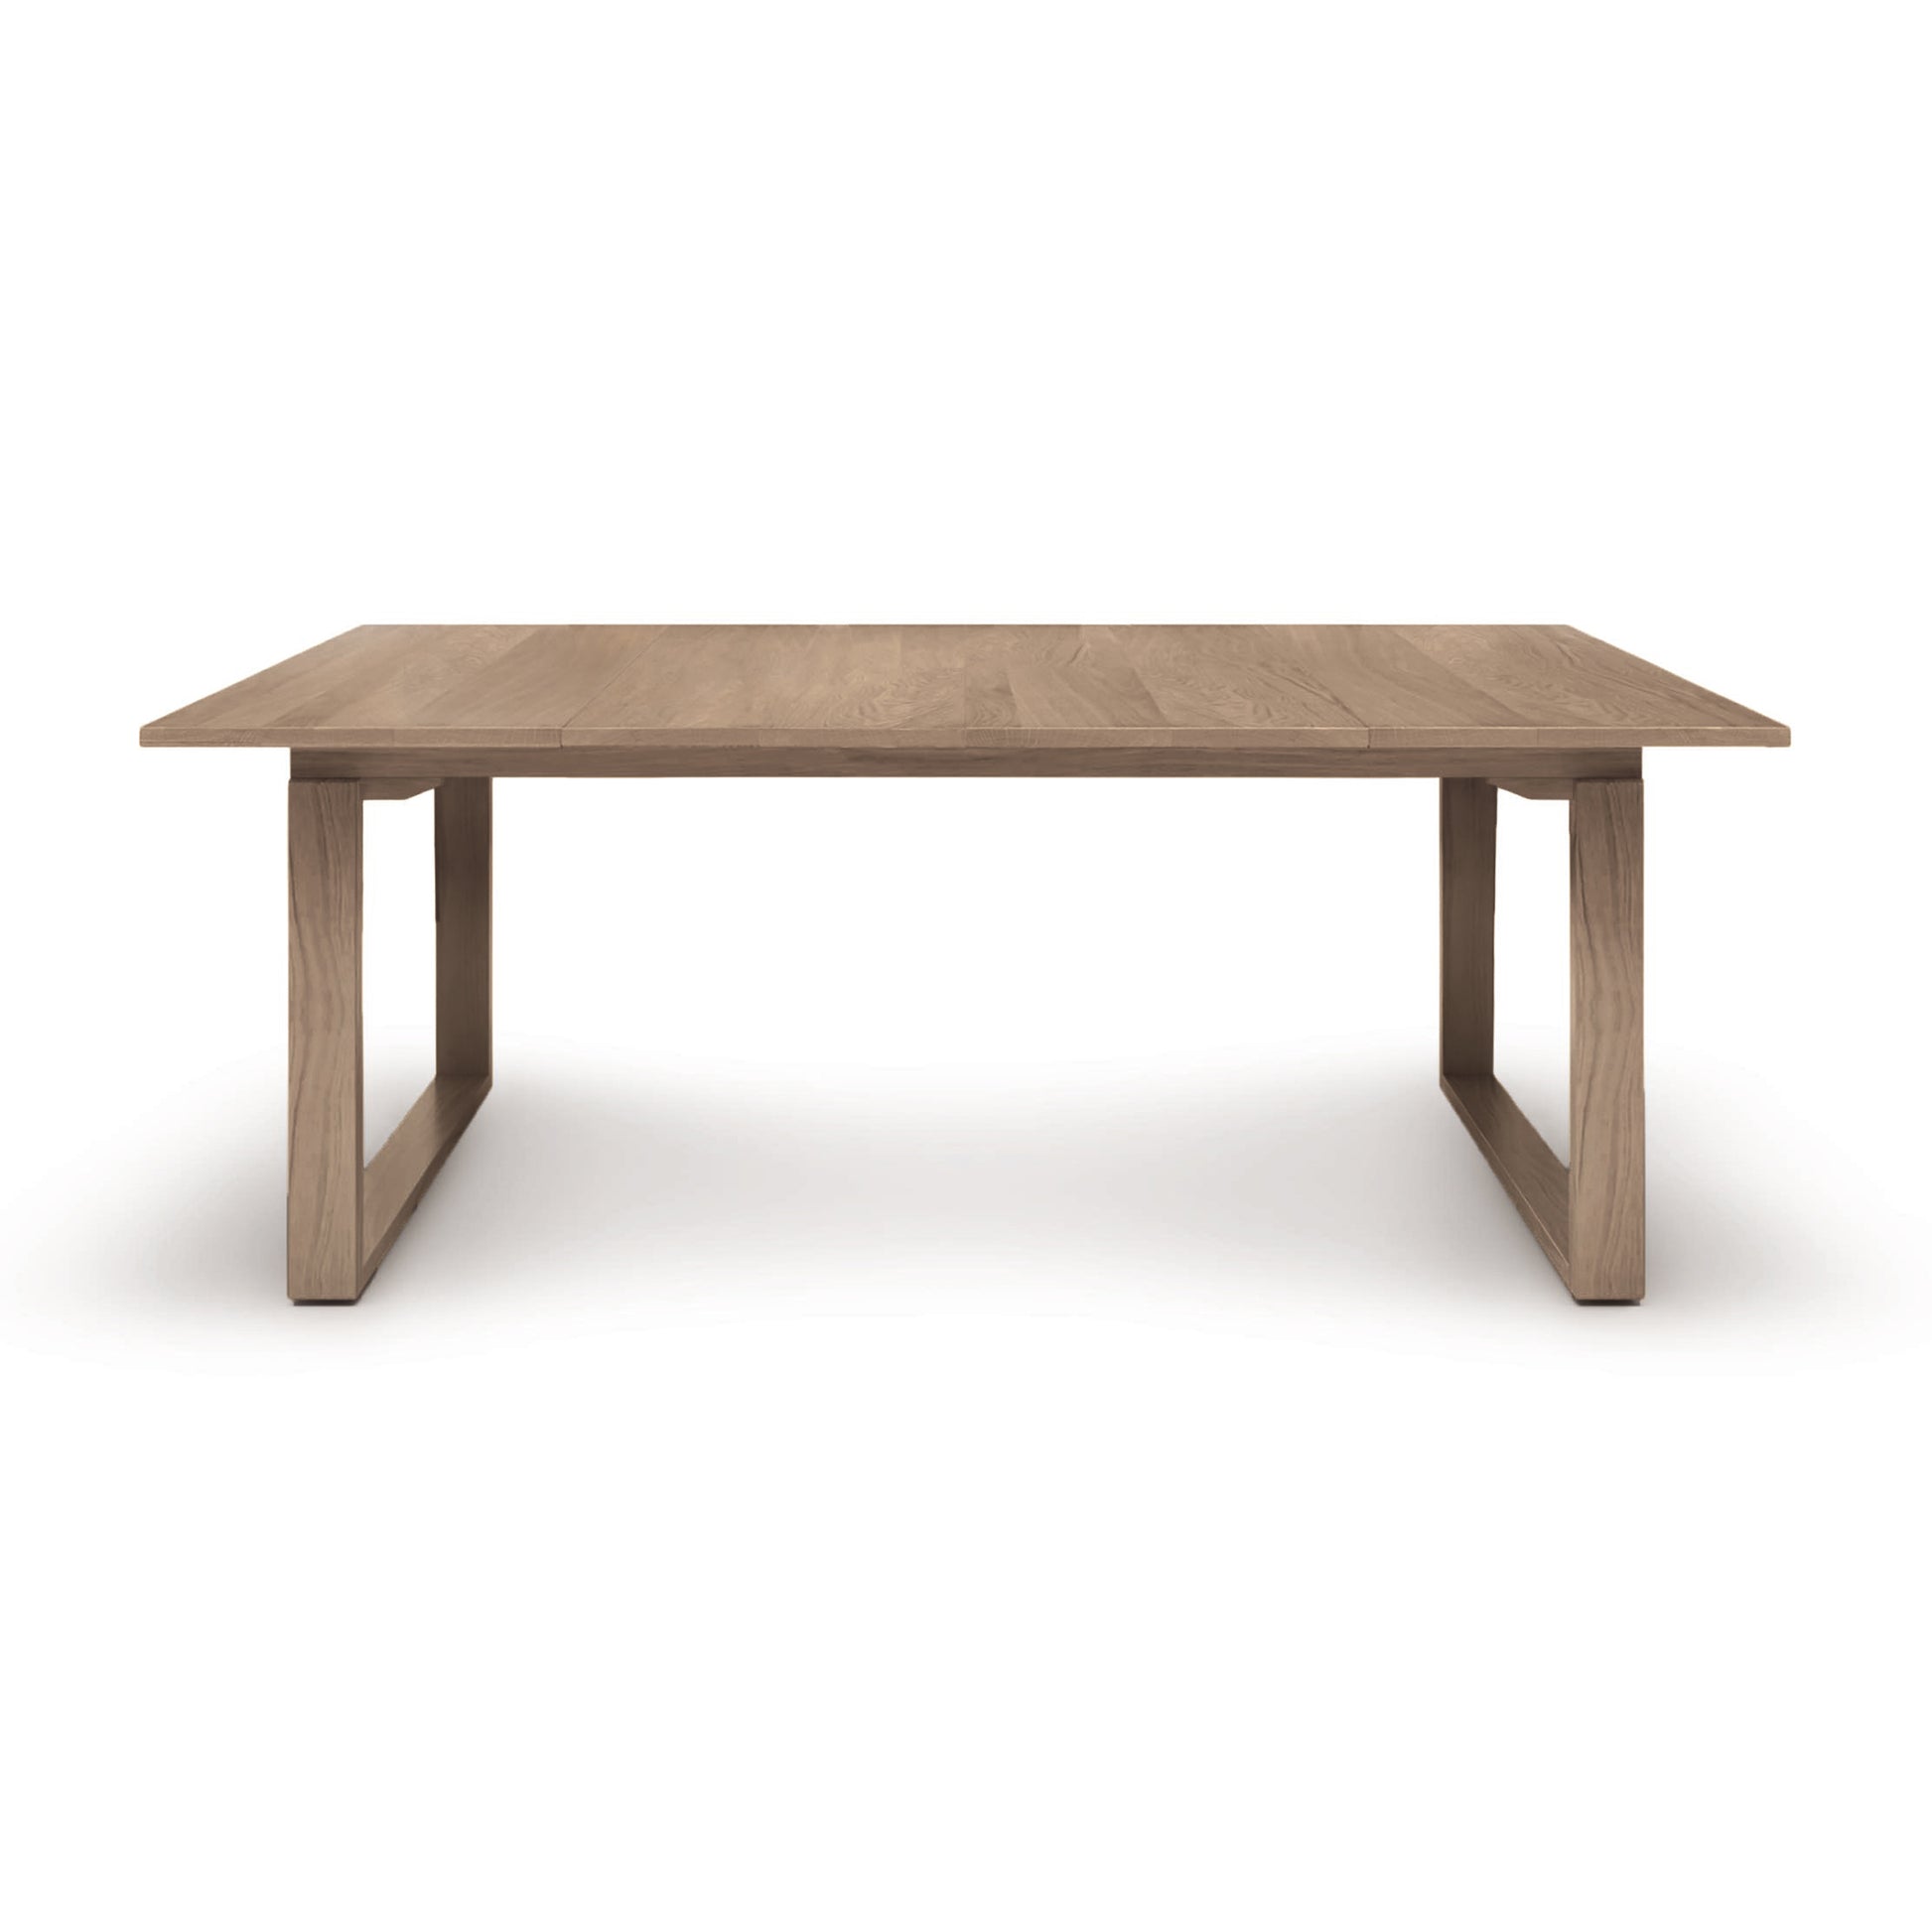 A rectangular Iso Extension Dining Table featuring solid oak wood, on a white background by Copeland Furniture.